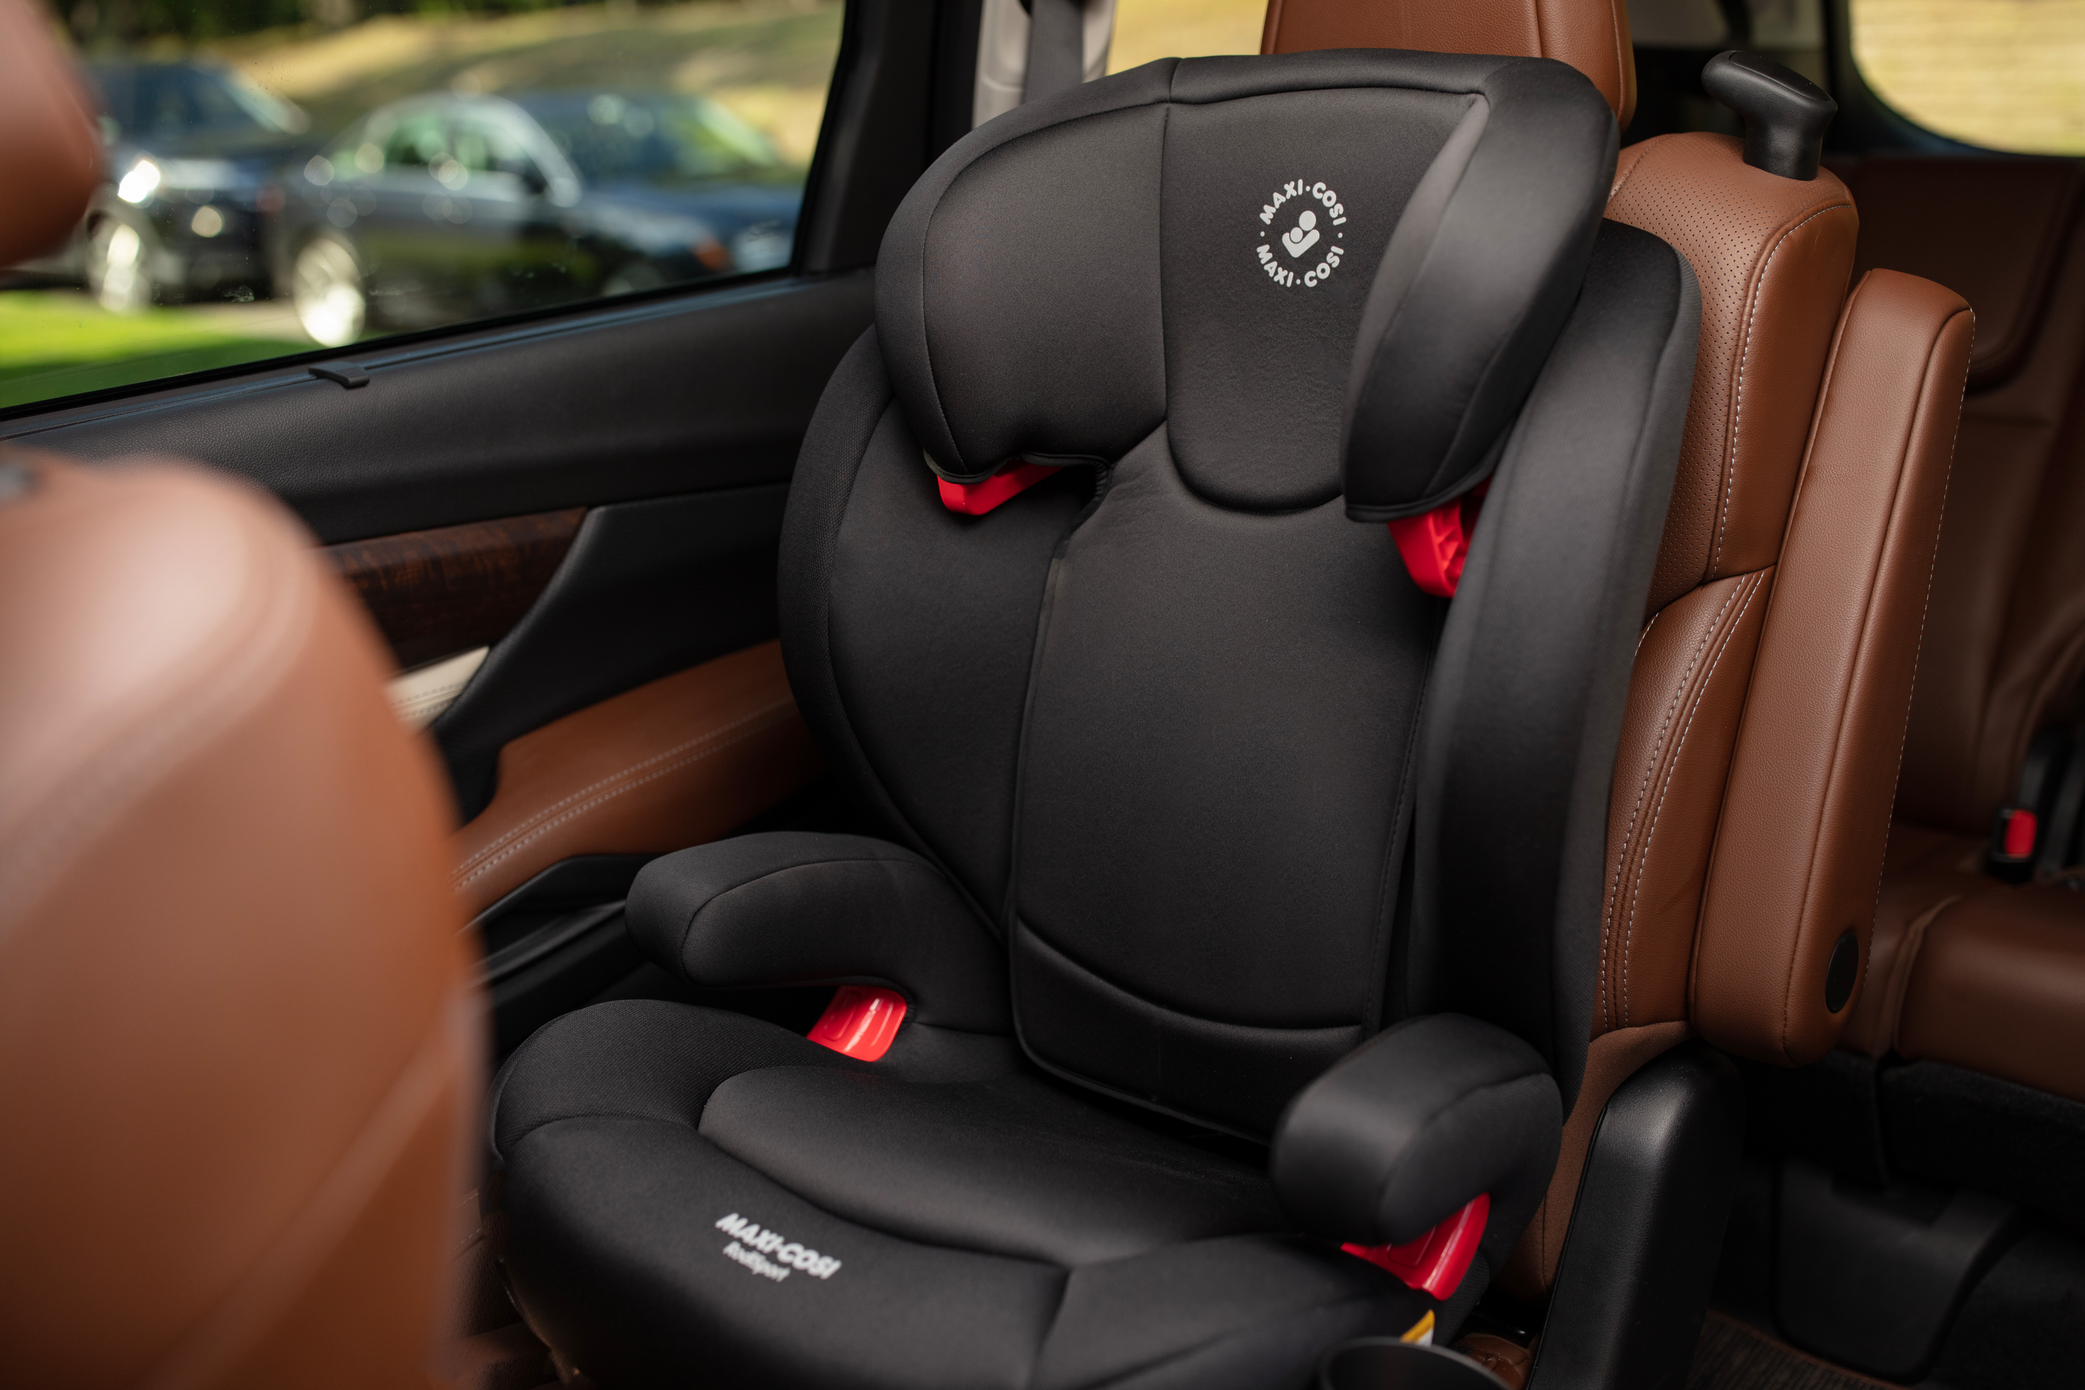 booster seat installed in car